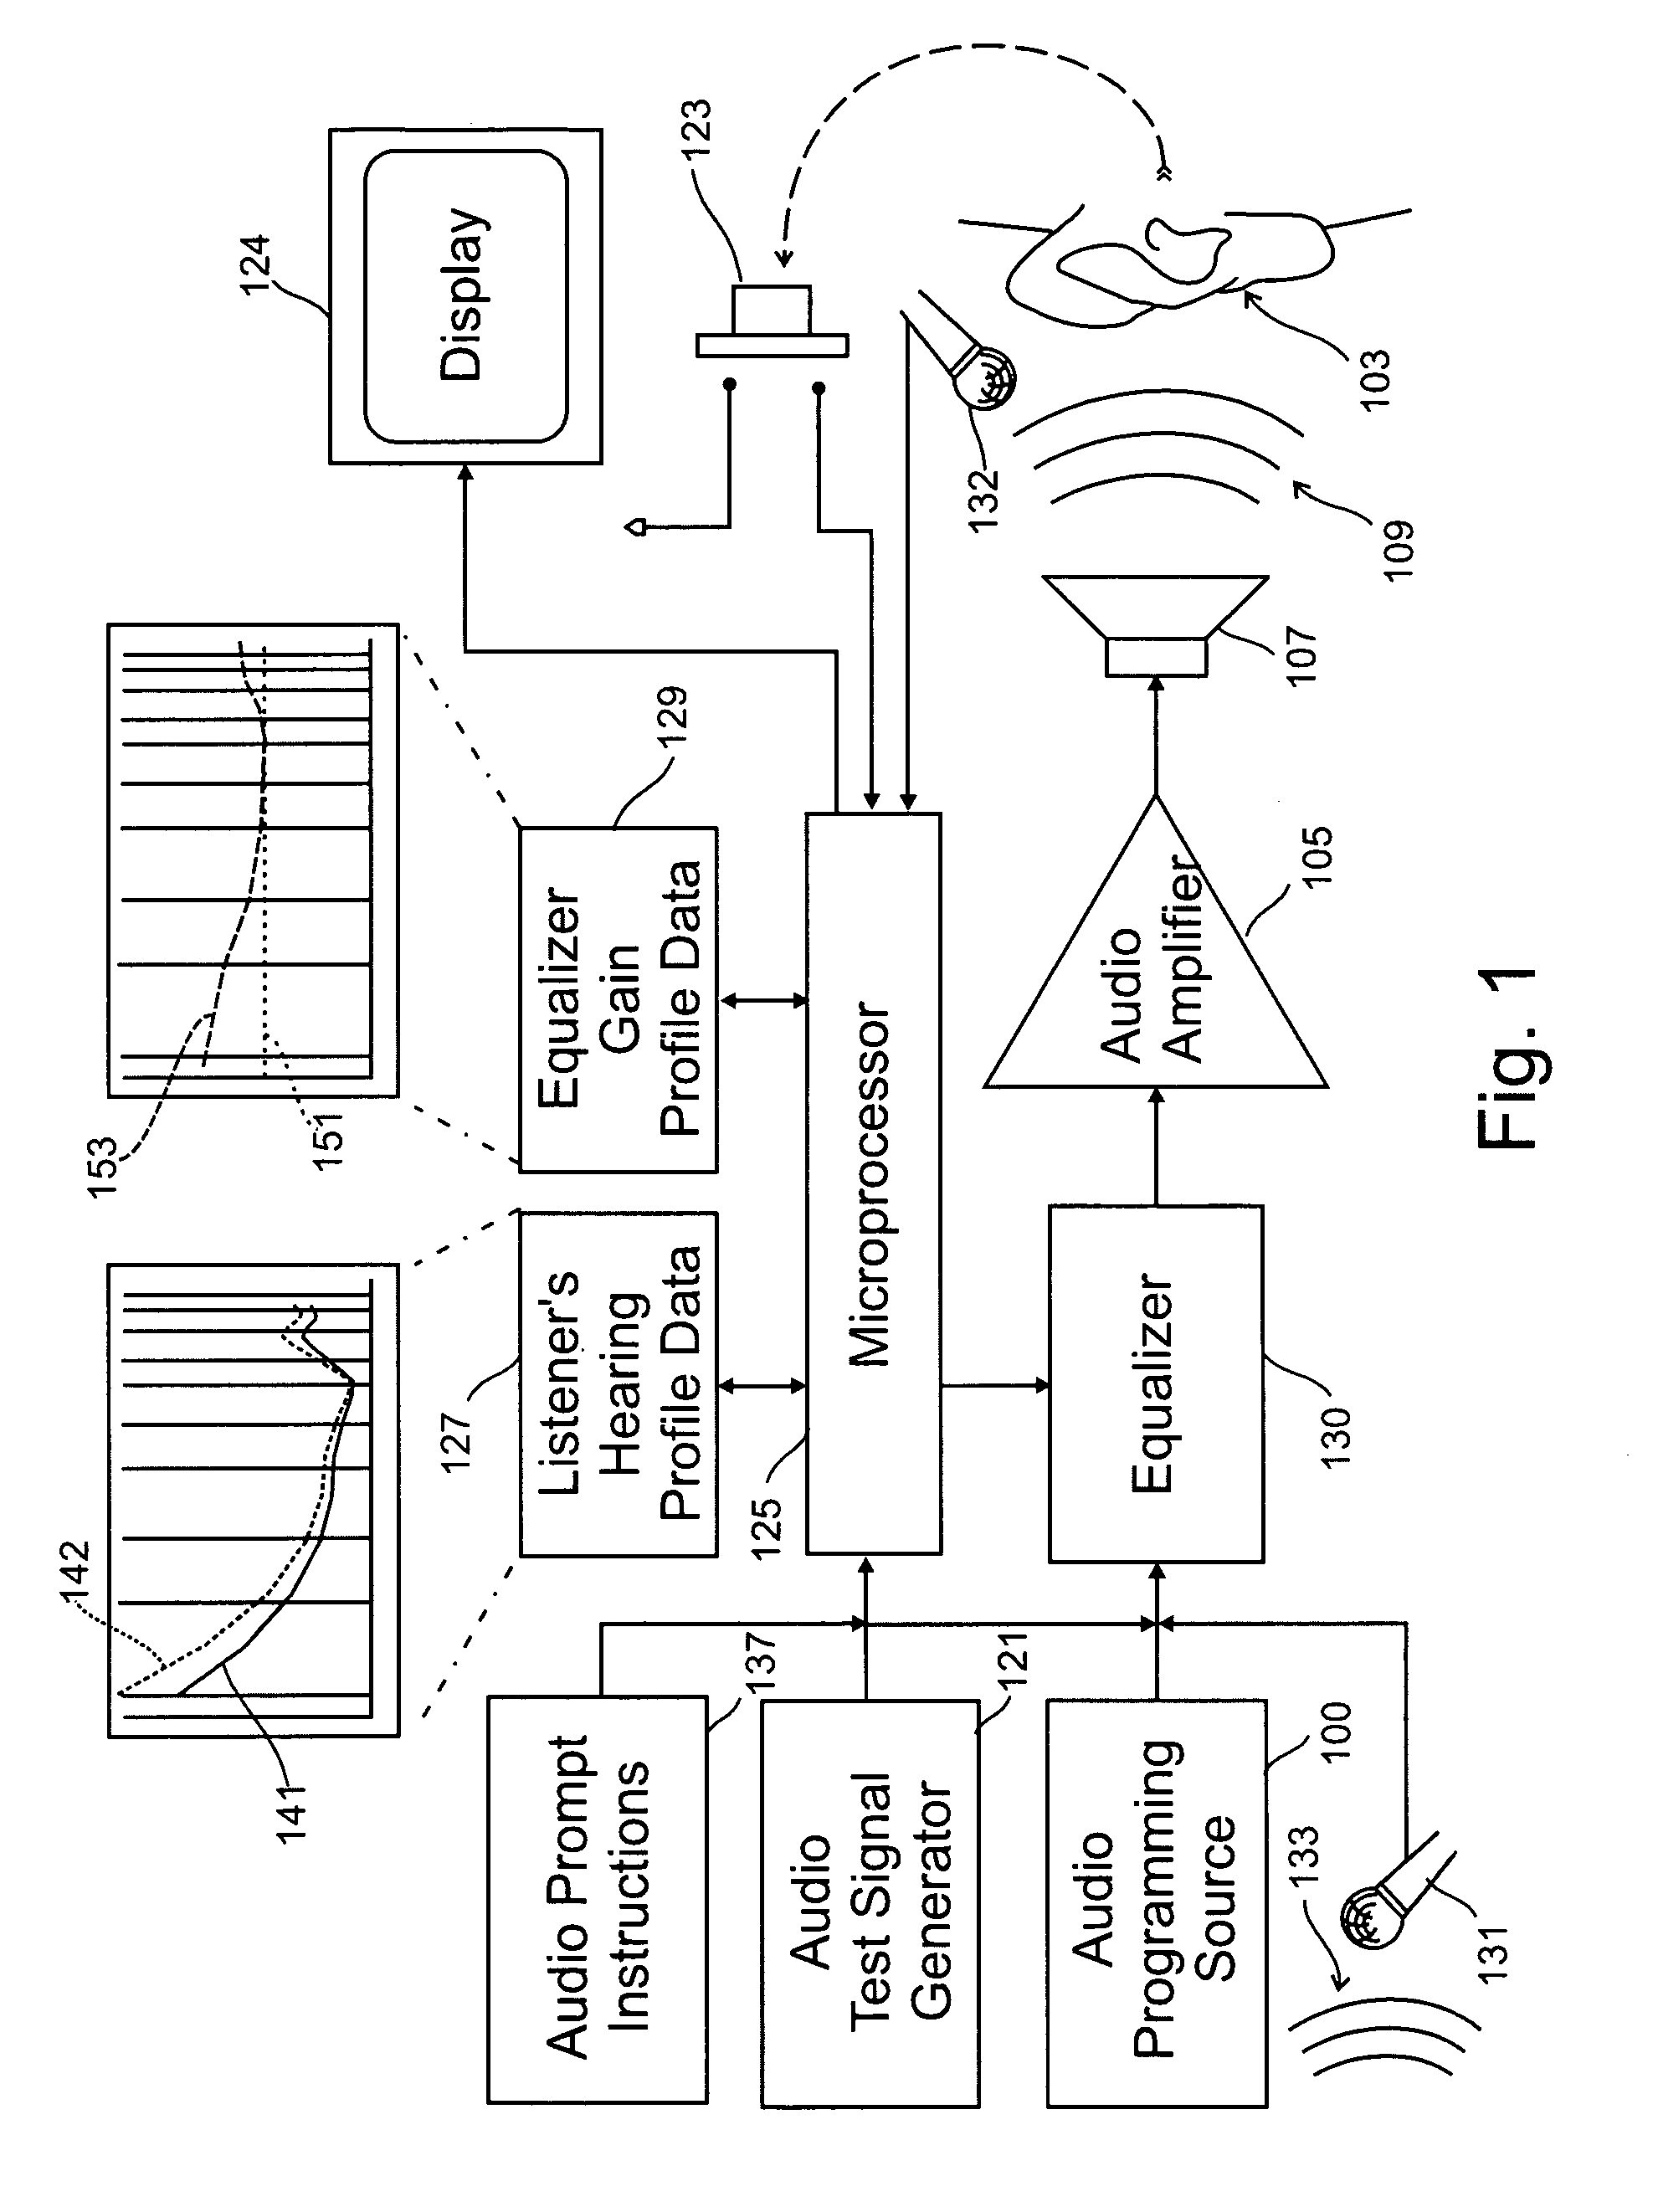 Listener specific audio reproduction system